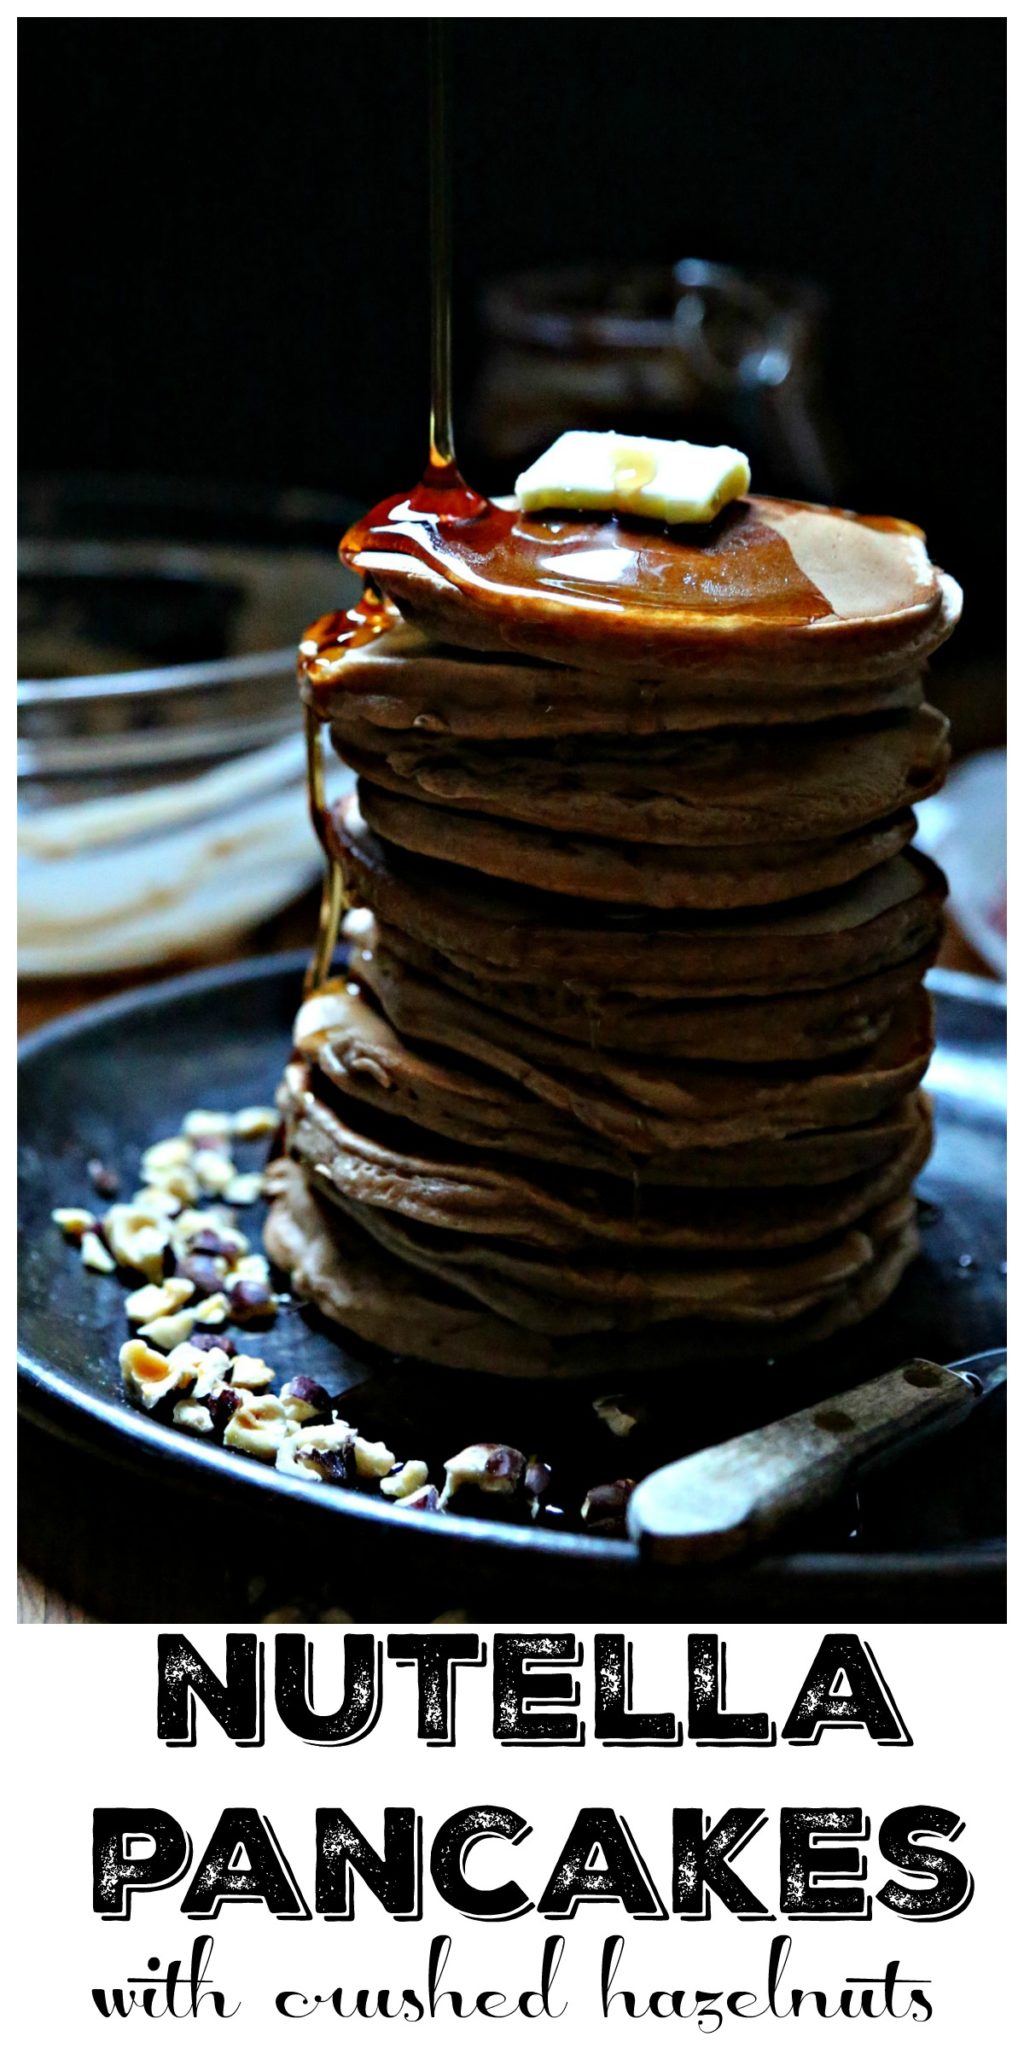 Pinterest Image. Stack of Nutella pancakes on plate with butter, syrup and crushed hazelnuts. Text overlay that reads Nutella Pancakes with crushed hazelnuts.